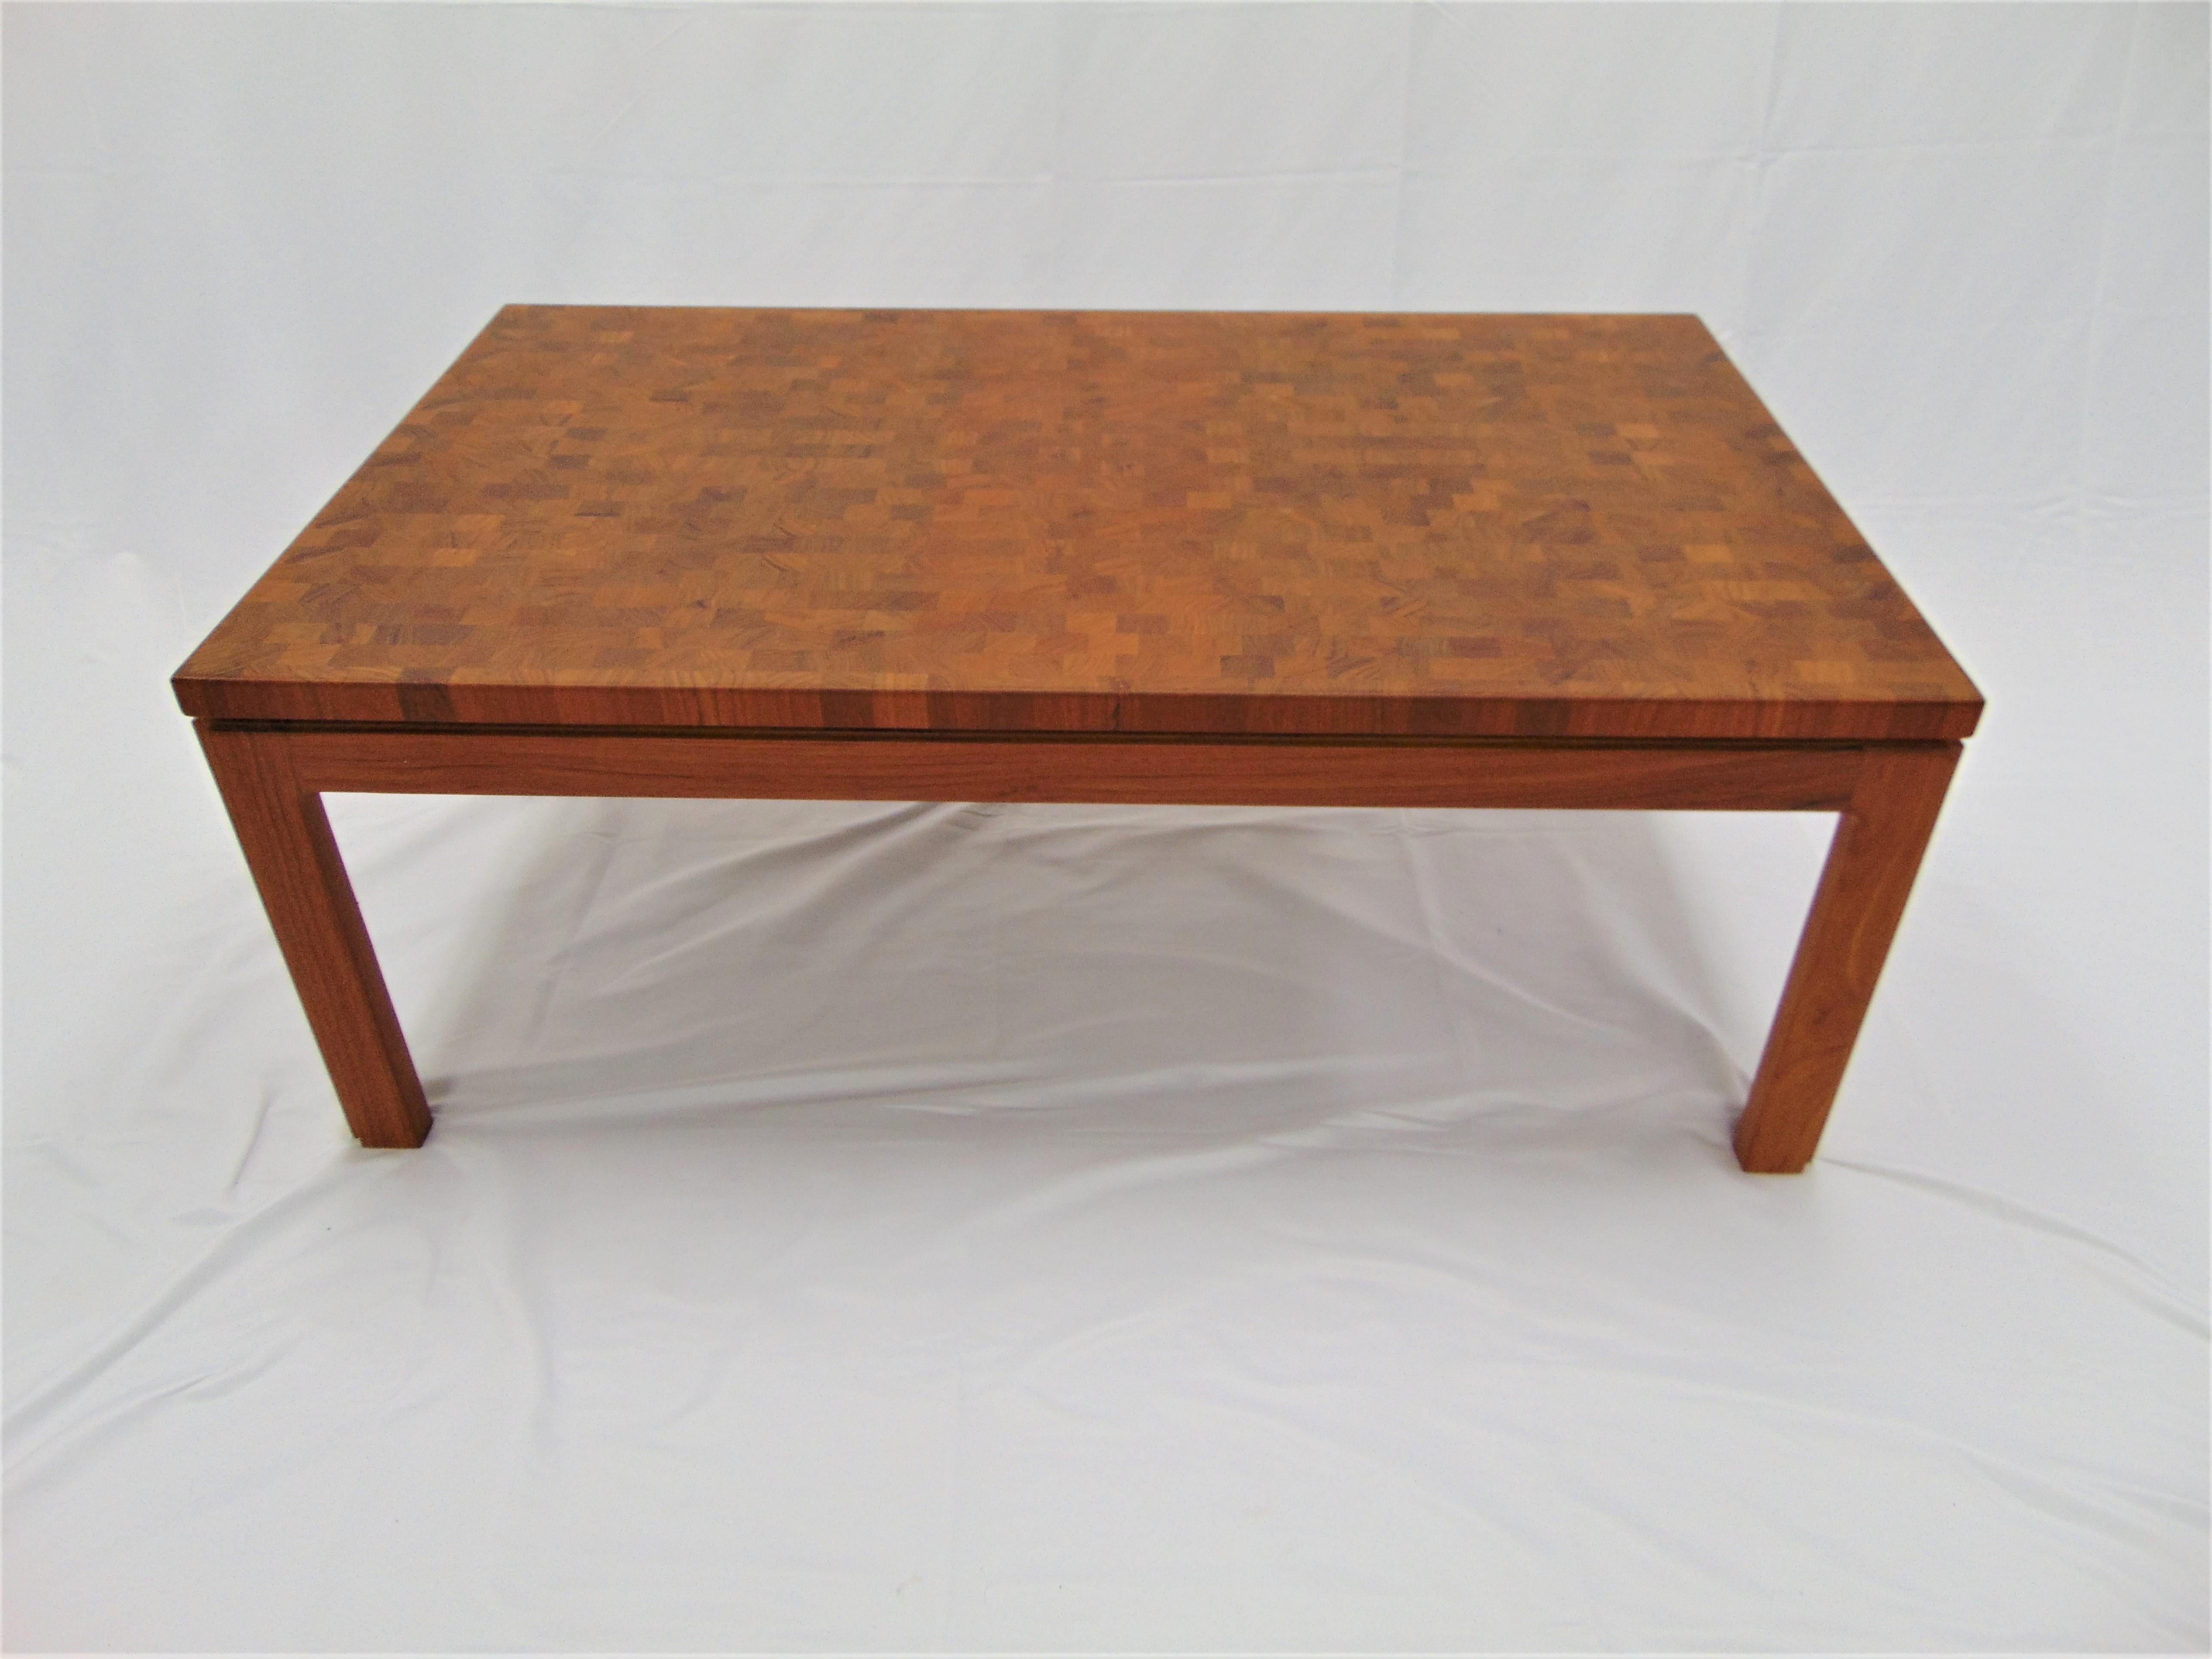 Parquetry Parquet Vintage Midcentury Teak Coffee Table by Tarm Stole For Sale